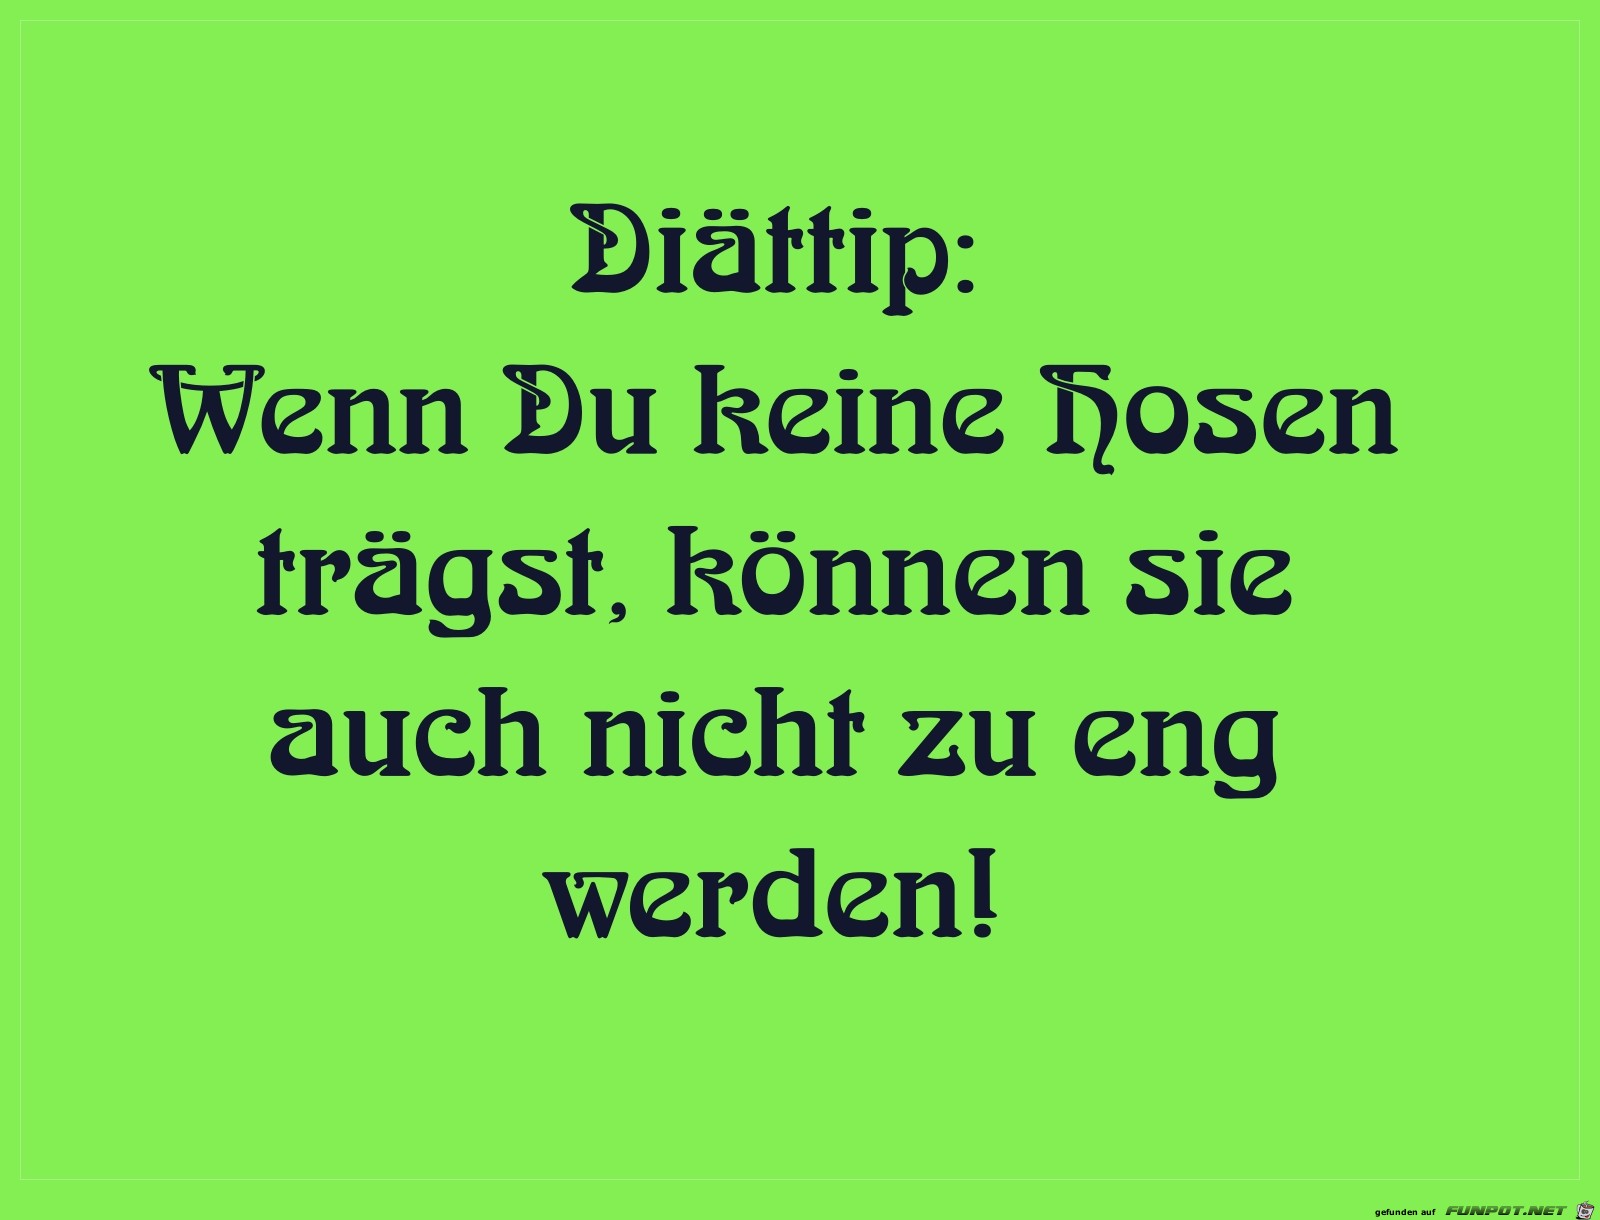 Dittip